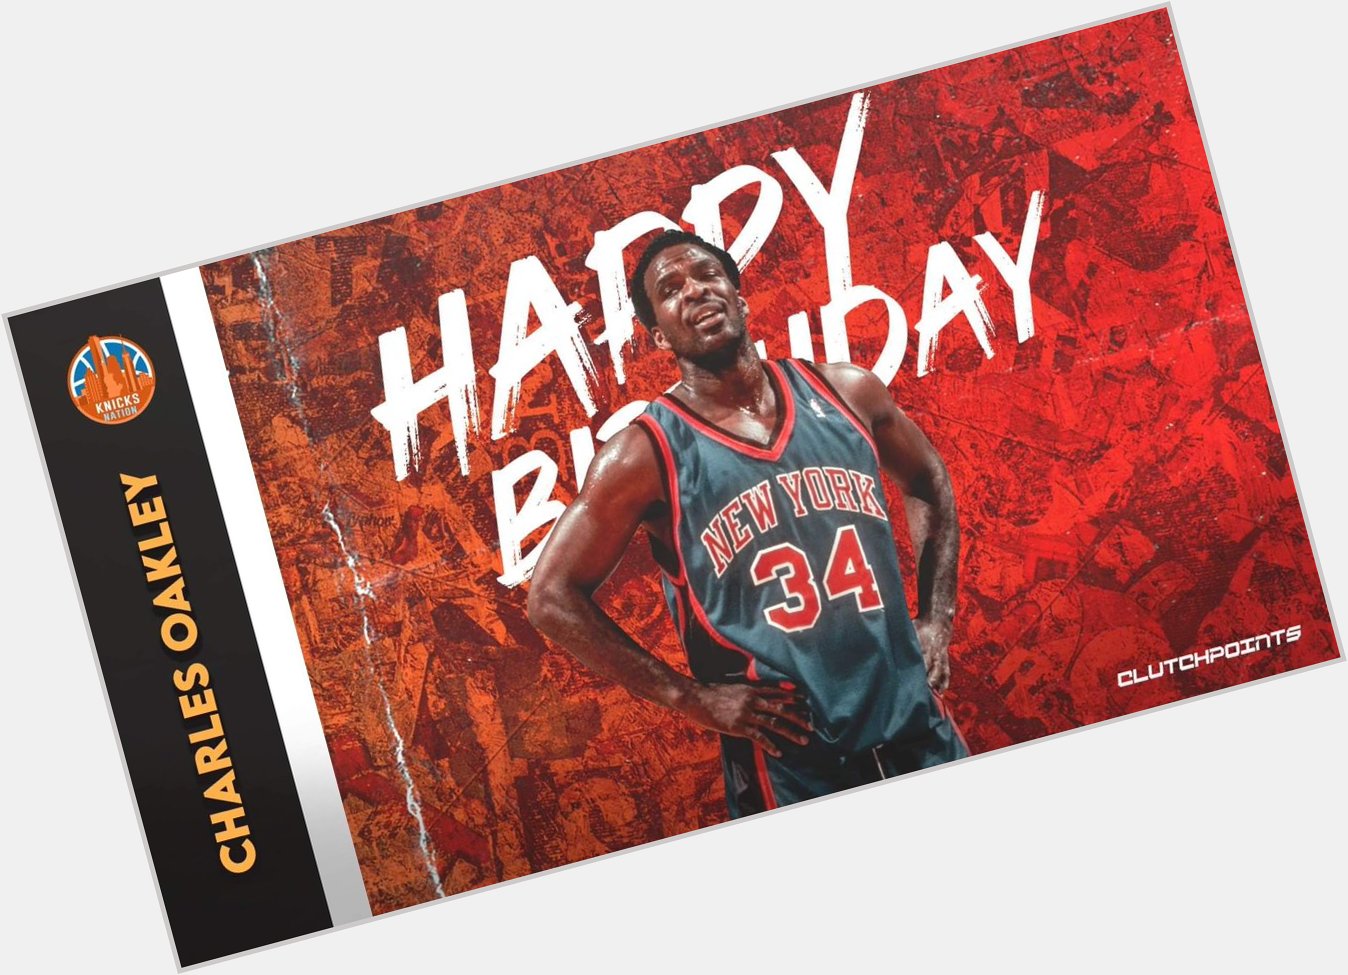 Happy 57th birthday to one of the Knicks legends, Charles Oakley! 